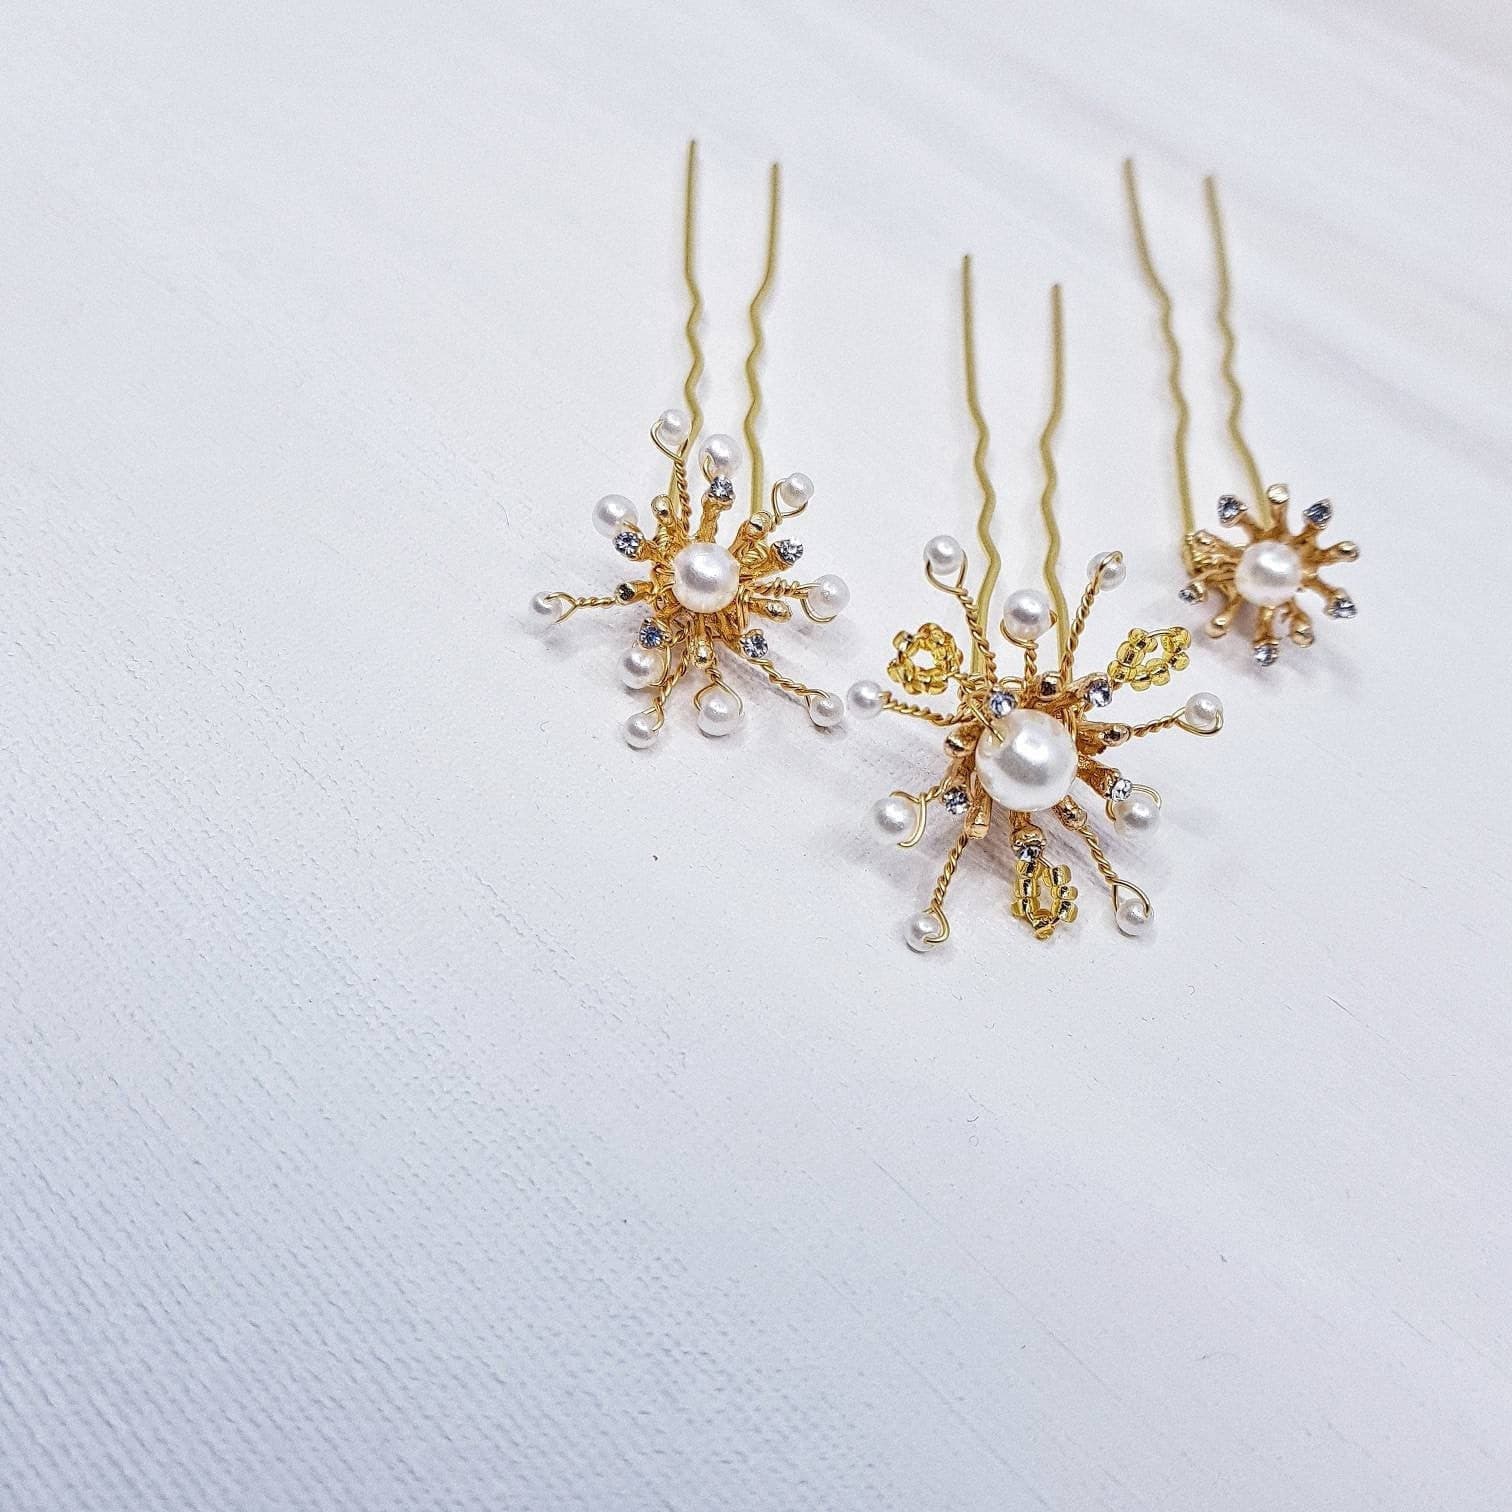 BoutiquebyBrendaLee ÉTOILE D'OR hair pins haircombs gold-toned haircomb wedding bridal constellation starburst star celestial hair accessory